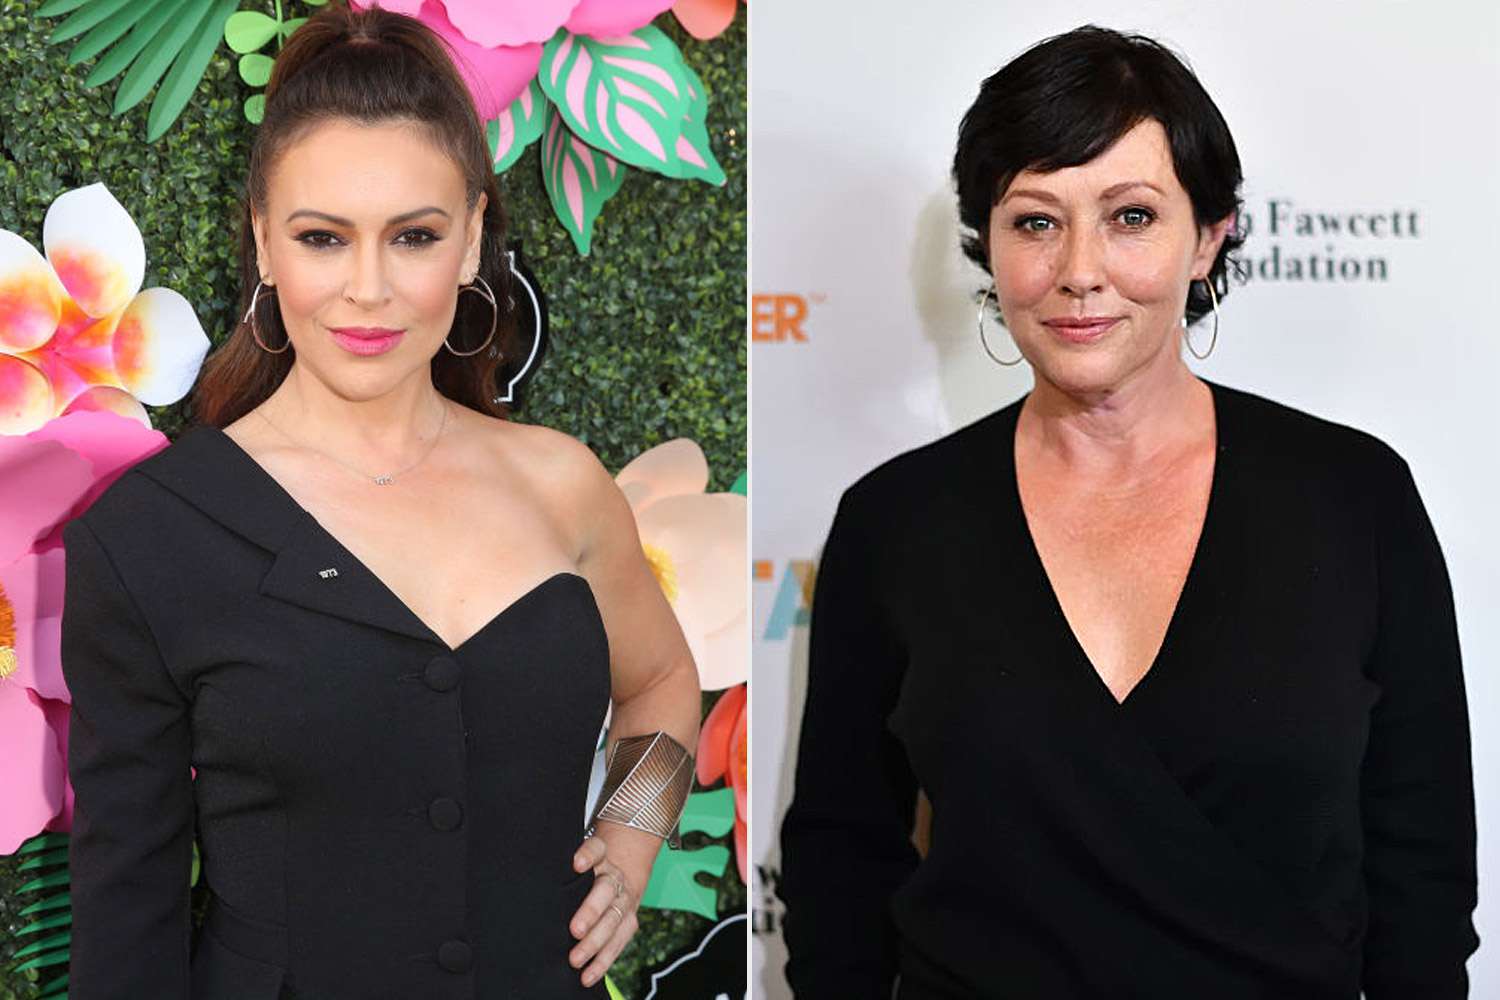 Alyssa Milano on Her Relationship with Charmed Costar Shannen Doherty